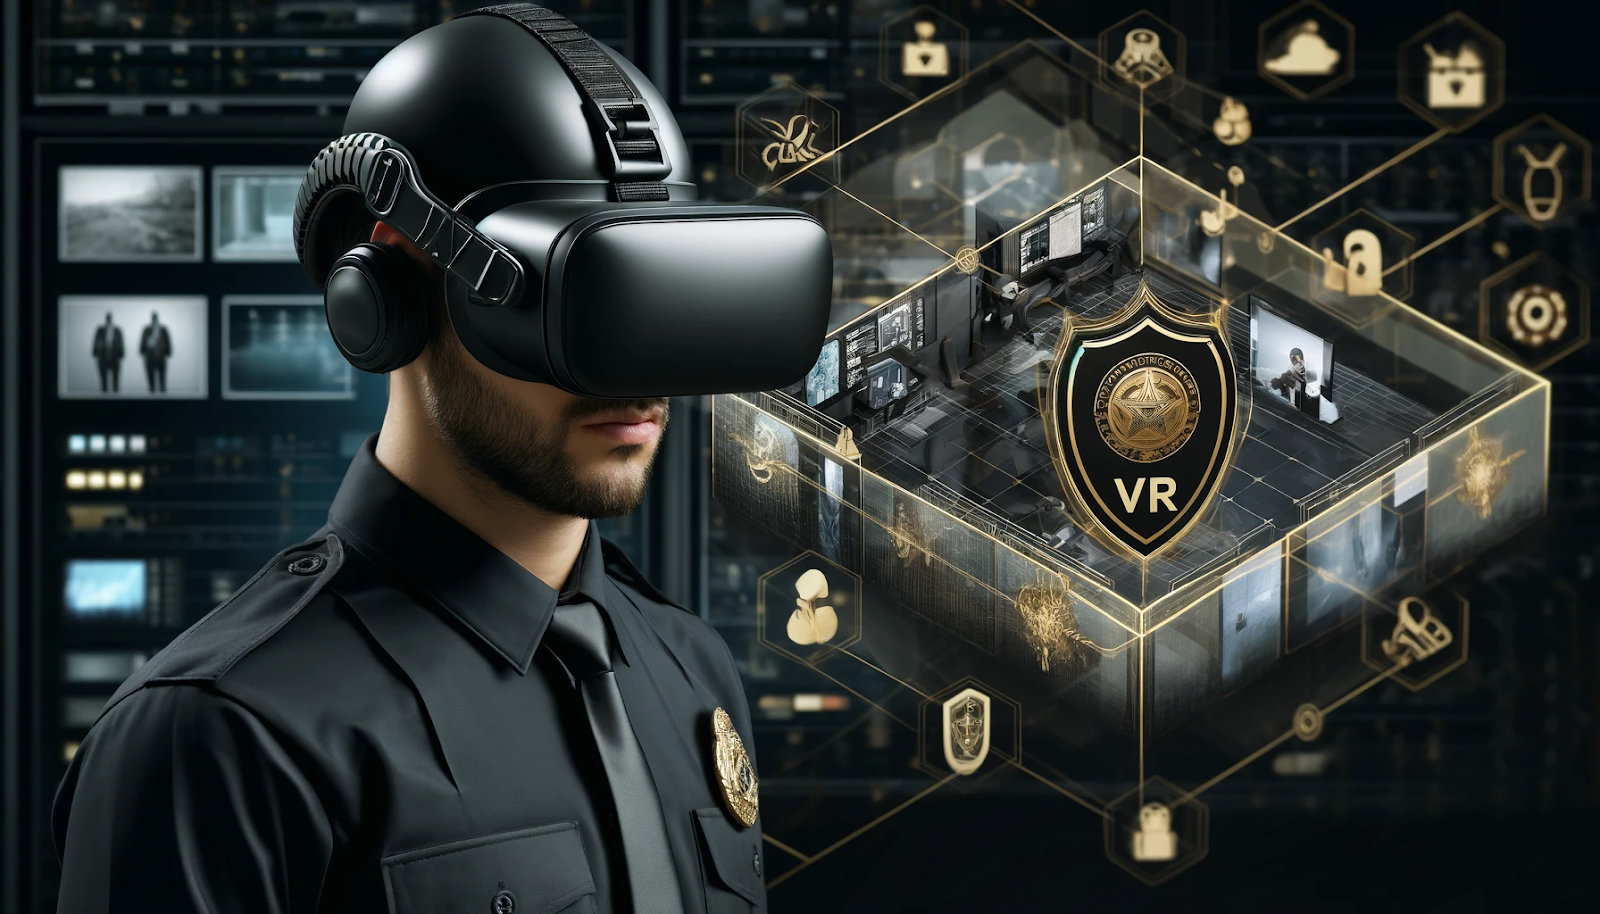 A photorealistic image depicting a security guard wearing a VR headset in a simulated environment. The colors black and gold dominate, symbolizing the advanced technology and immersive experience of virtual reality training in the security industry.